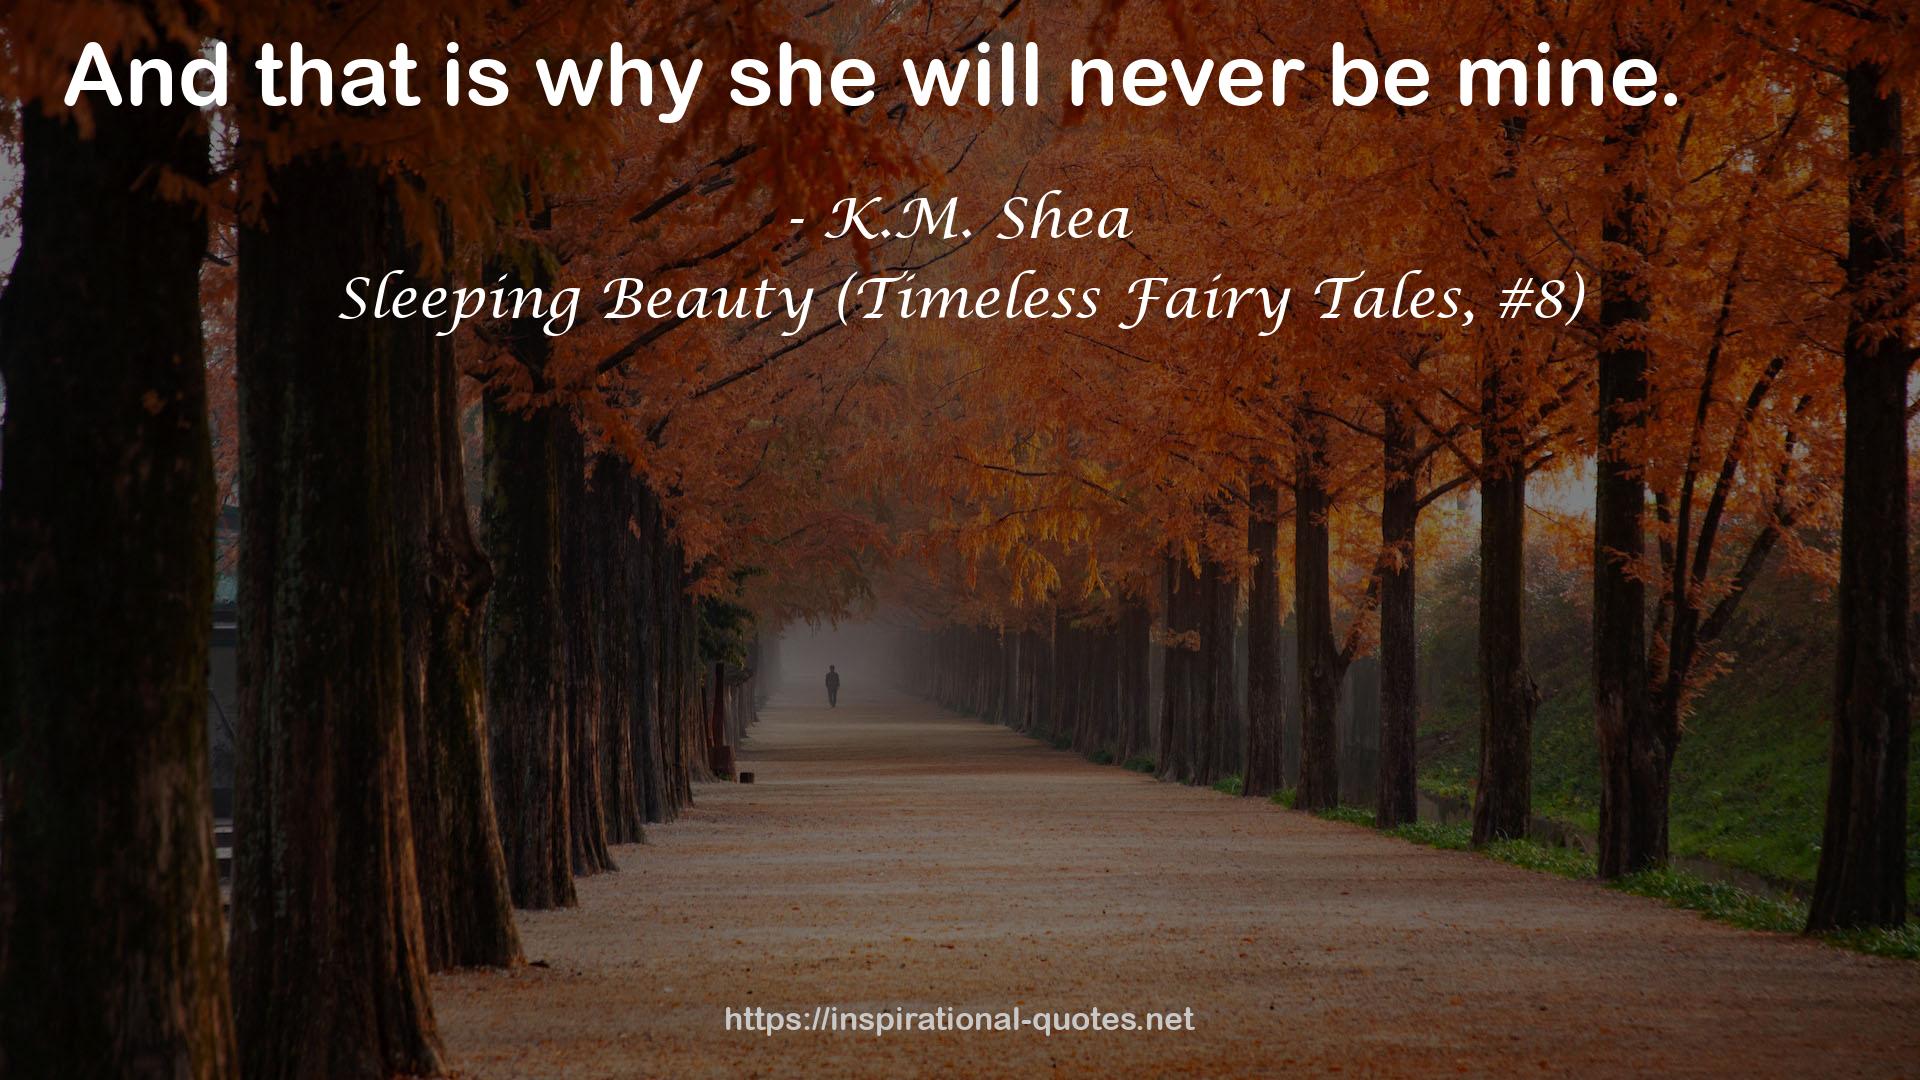 Sleeping Beauty (Timeless Fairy Tales, #8) QUOTES